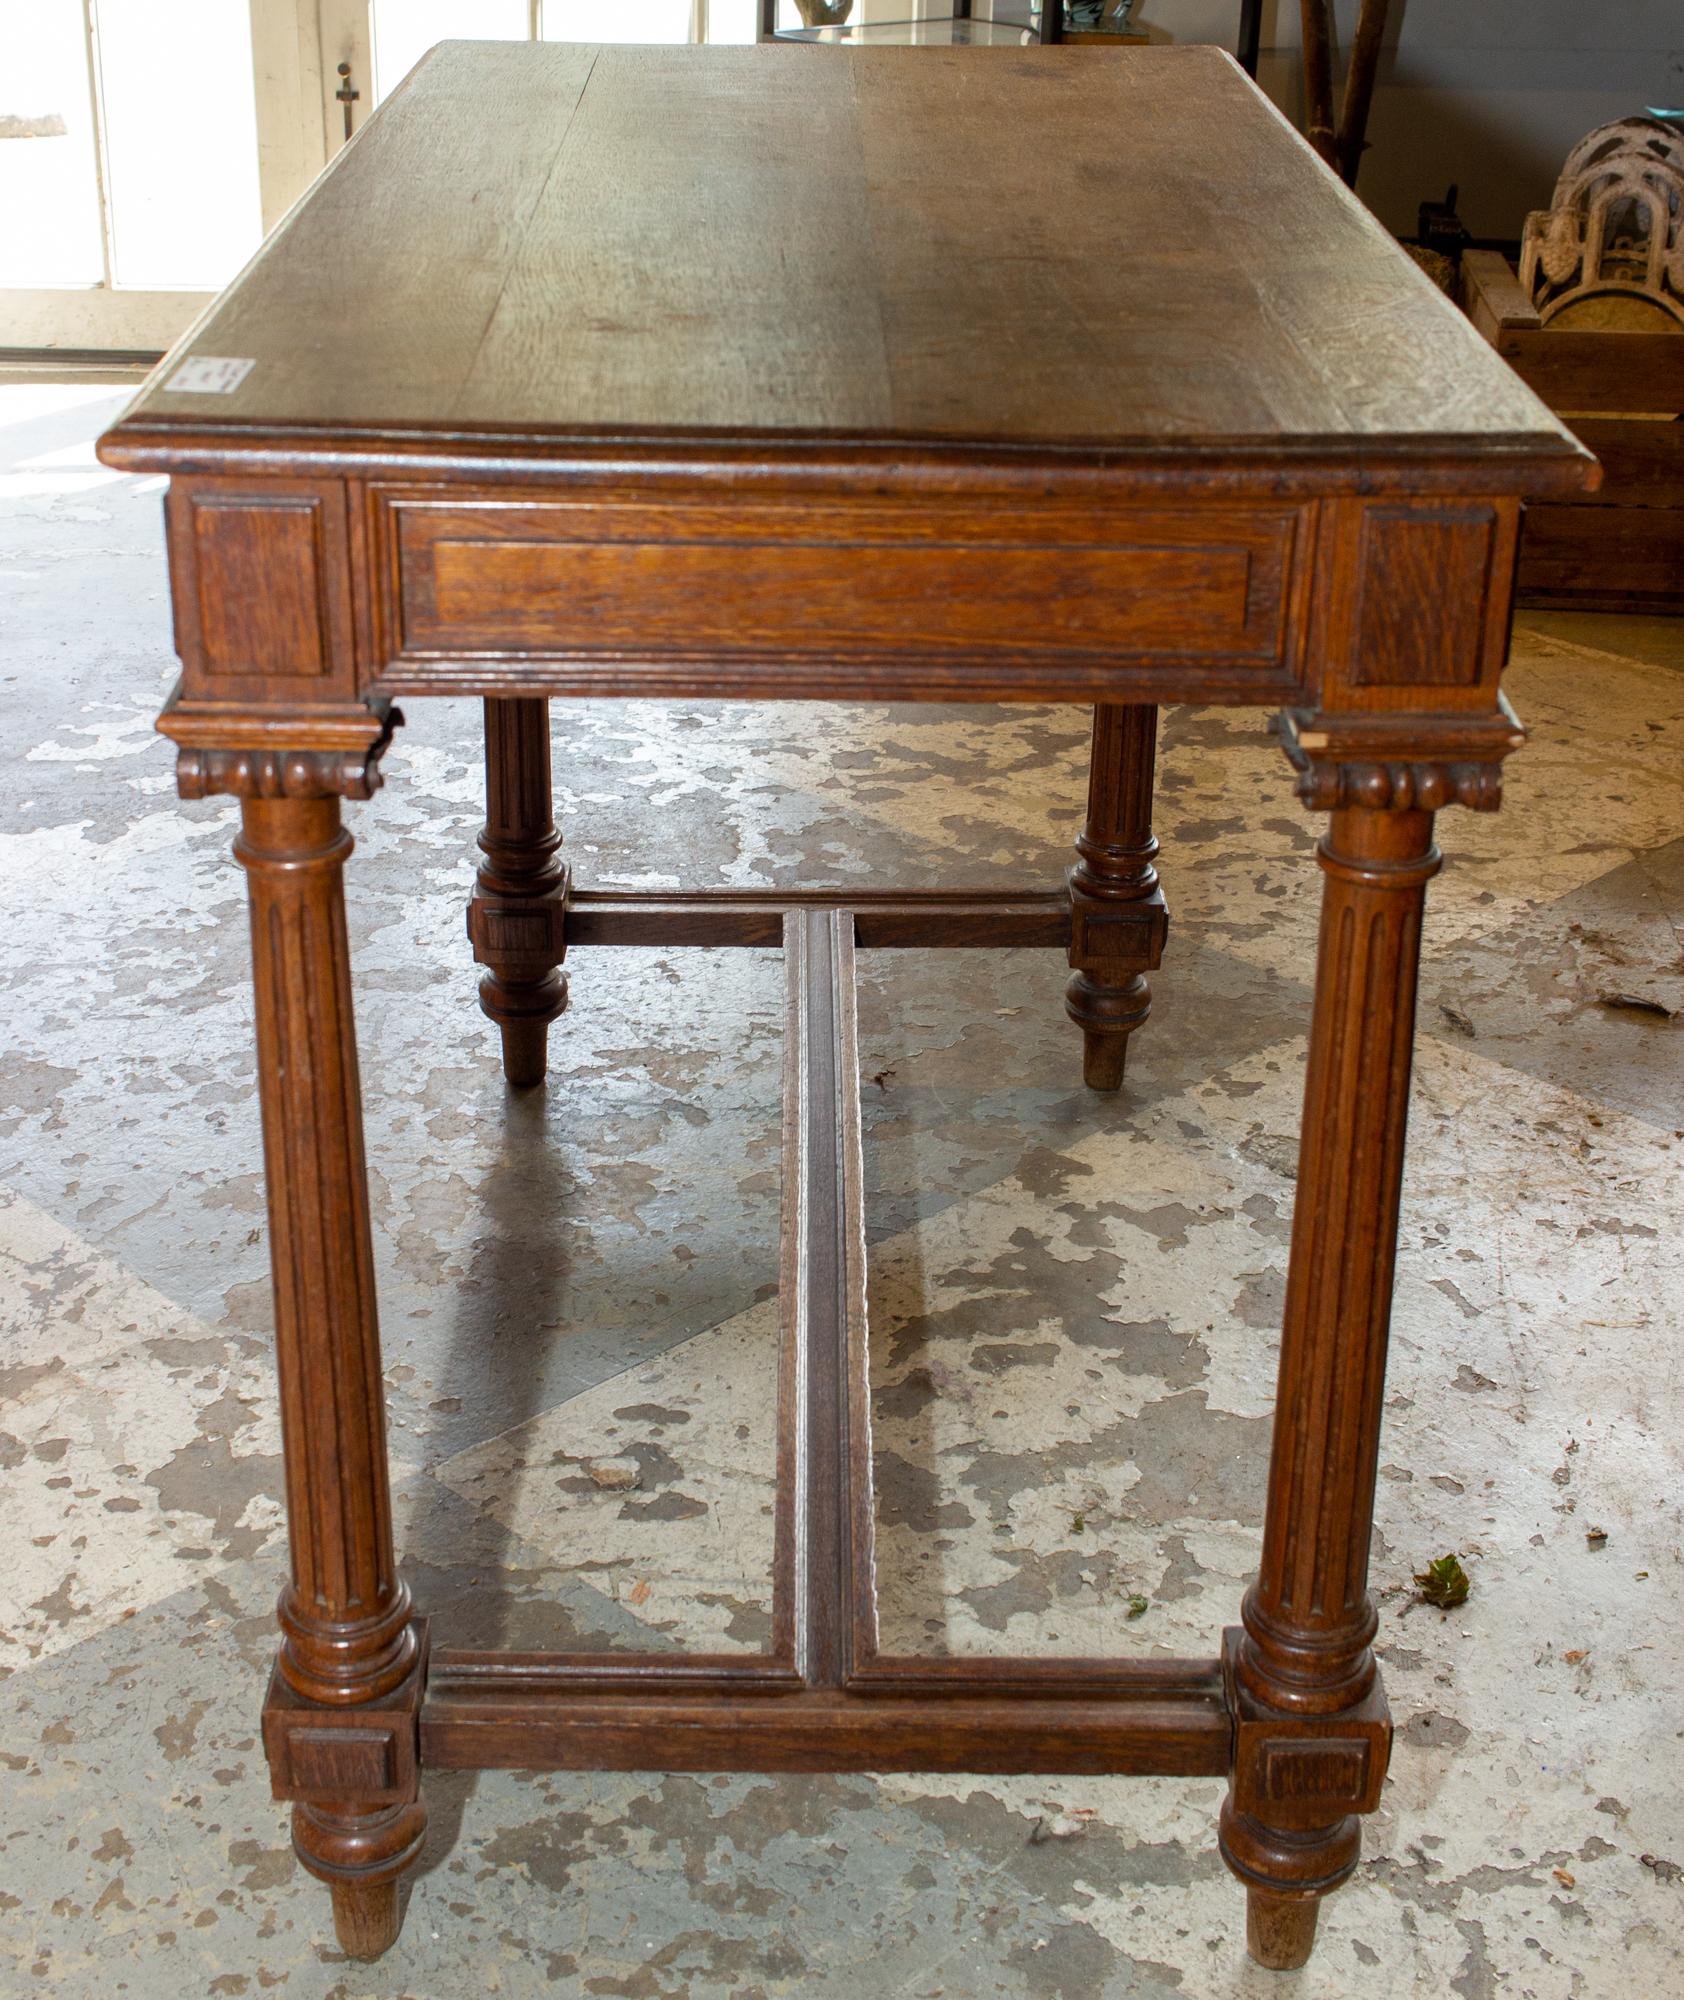 Early 20th Century Antique French Carved Wood Empire Style Table, circa 1900